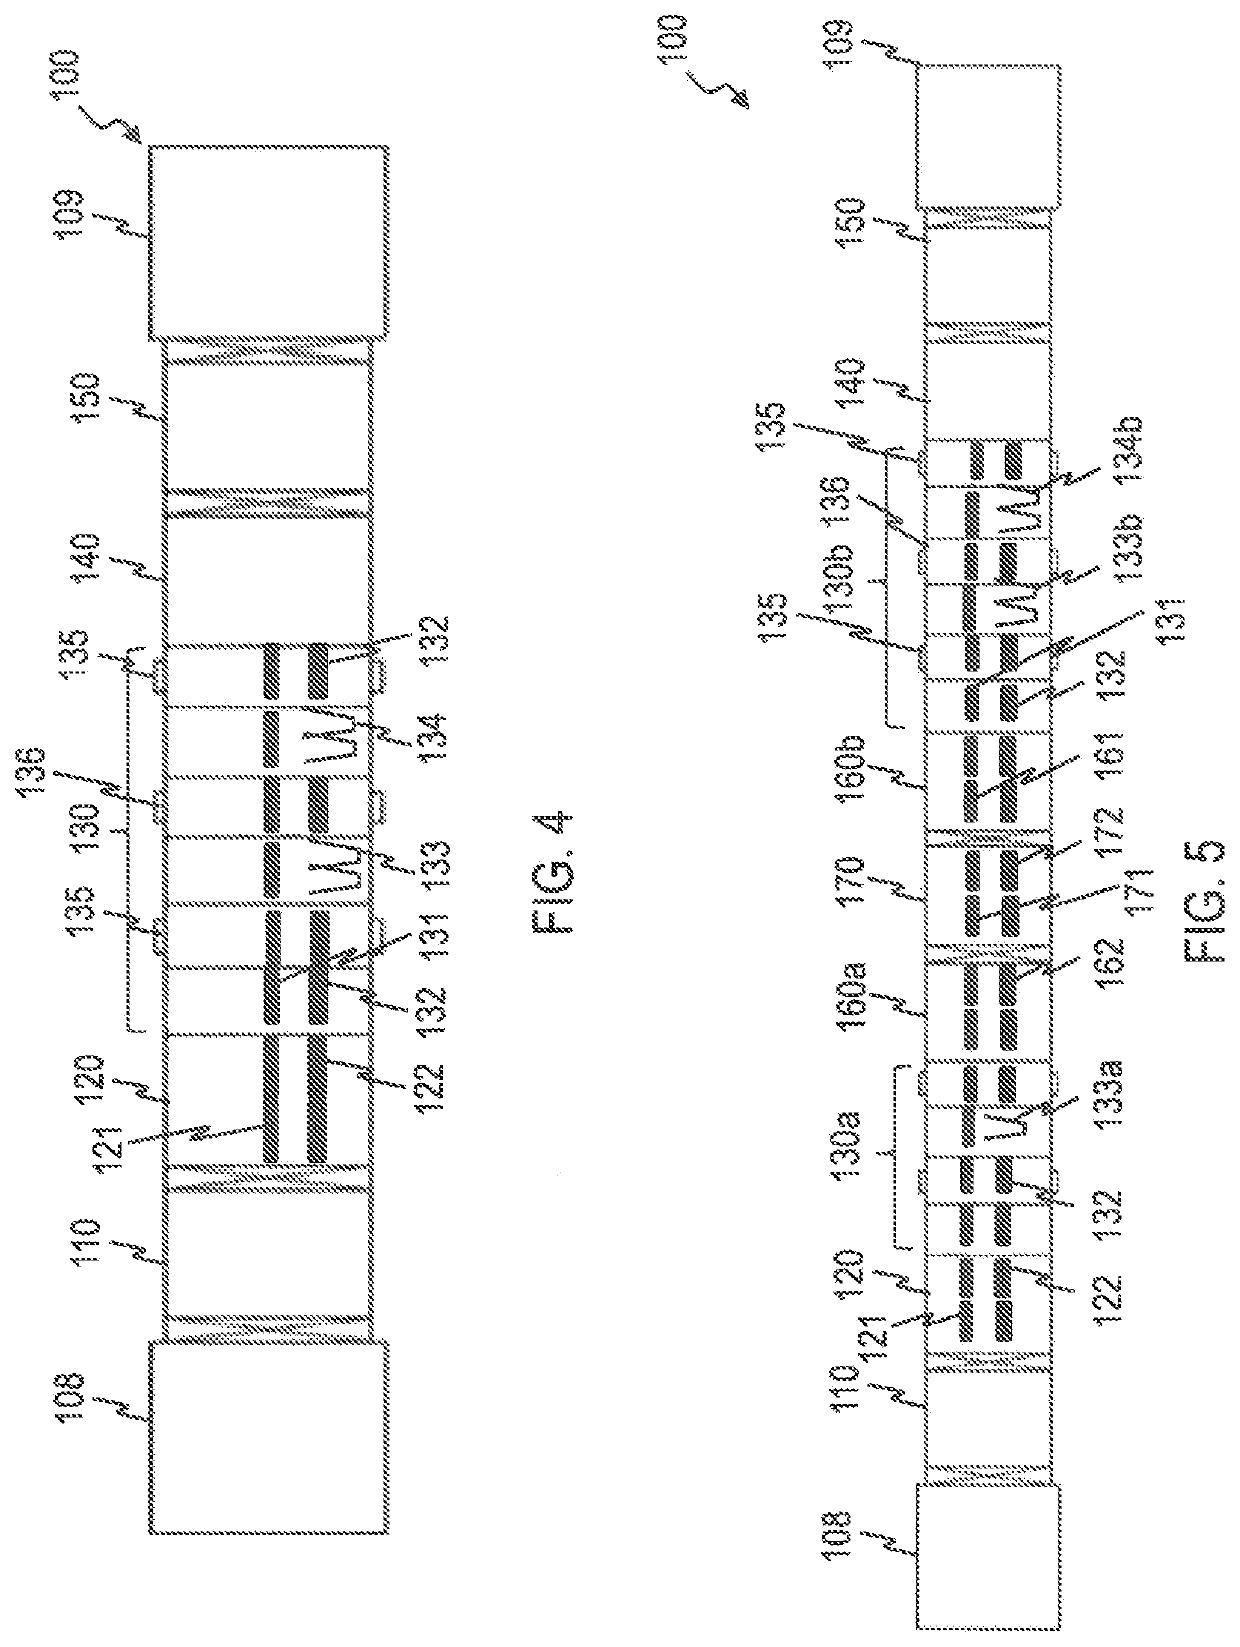 Continuous flow system and method for coating substrates